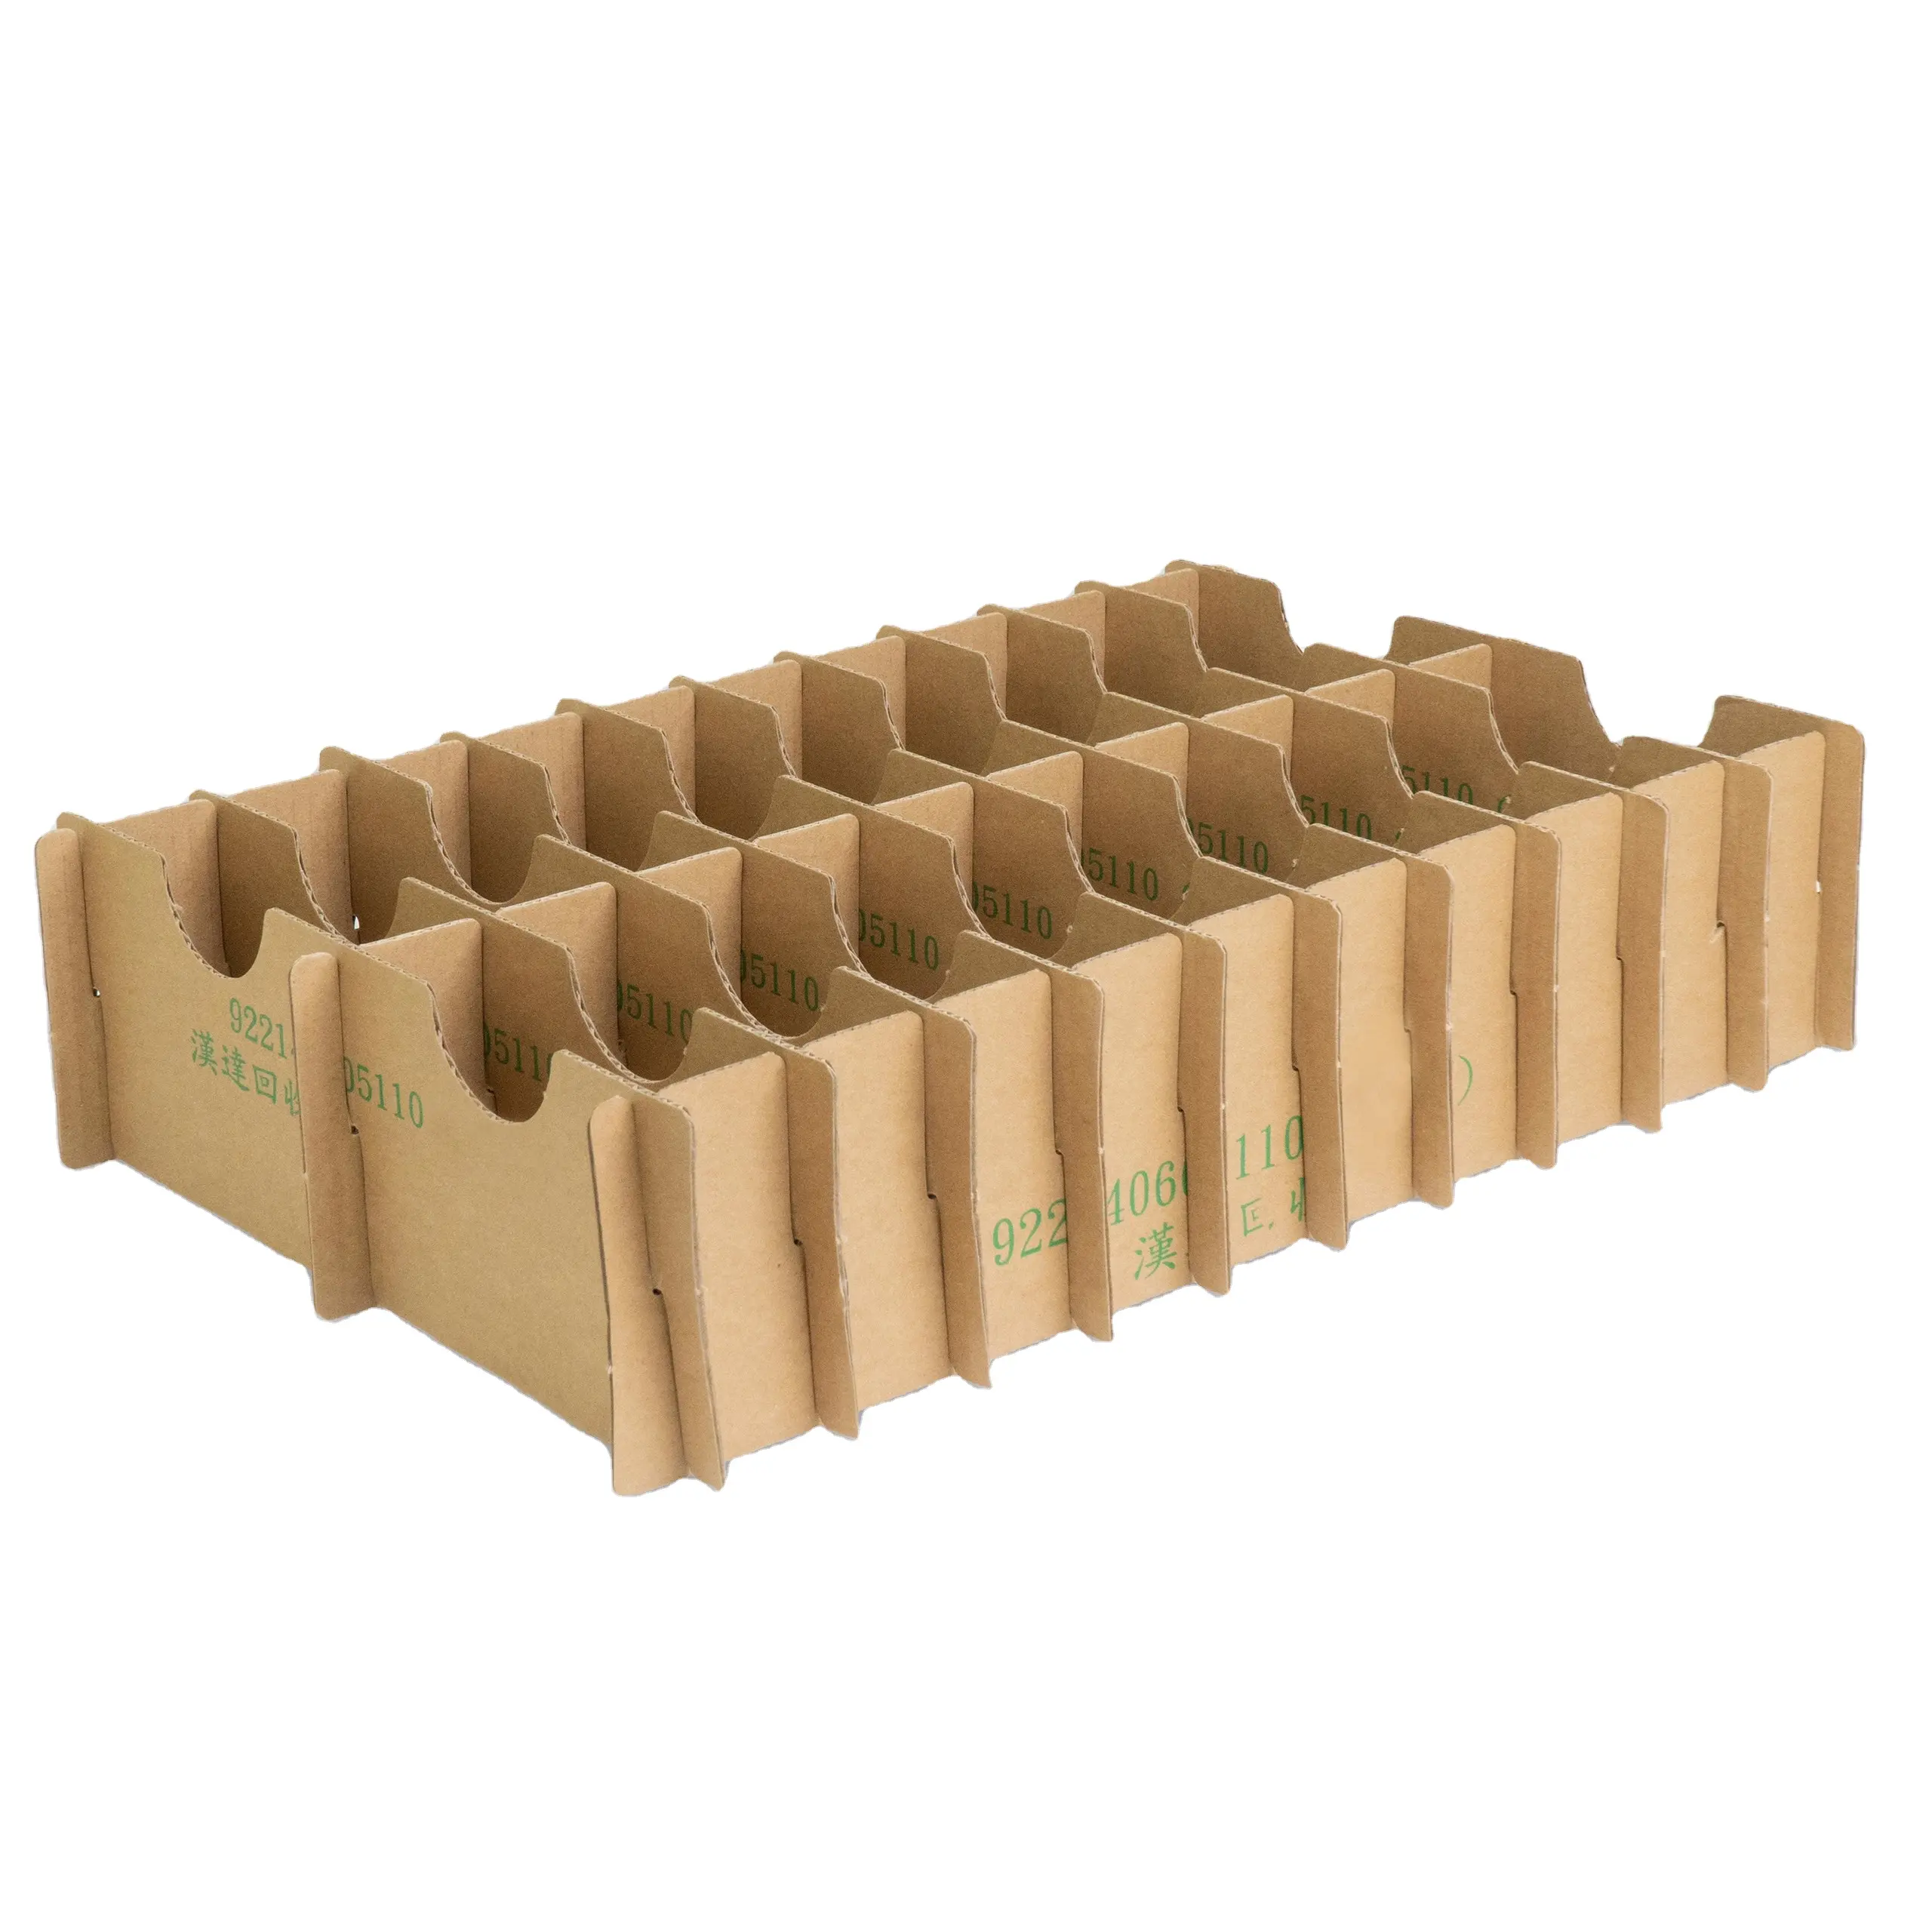 Wholesale, Solid single wall partition, carton box accessories to divide products into small compartments 2023